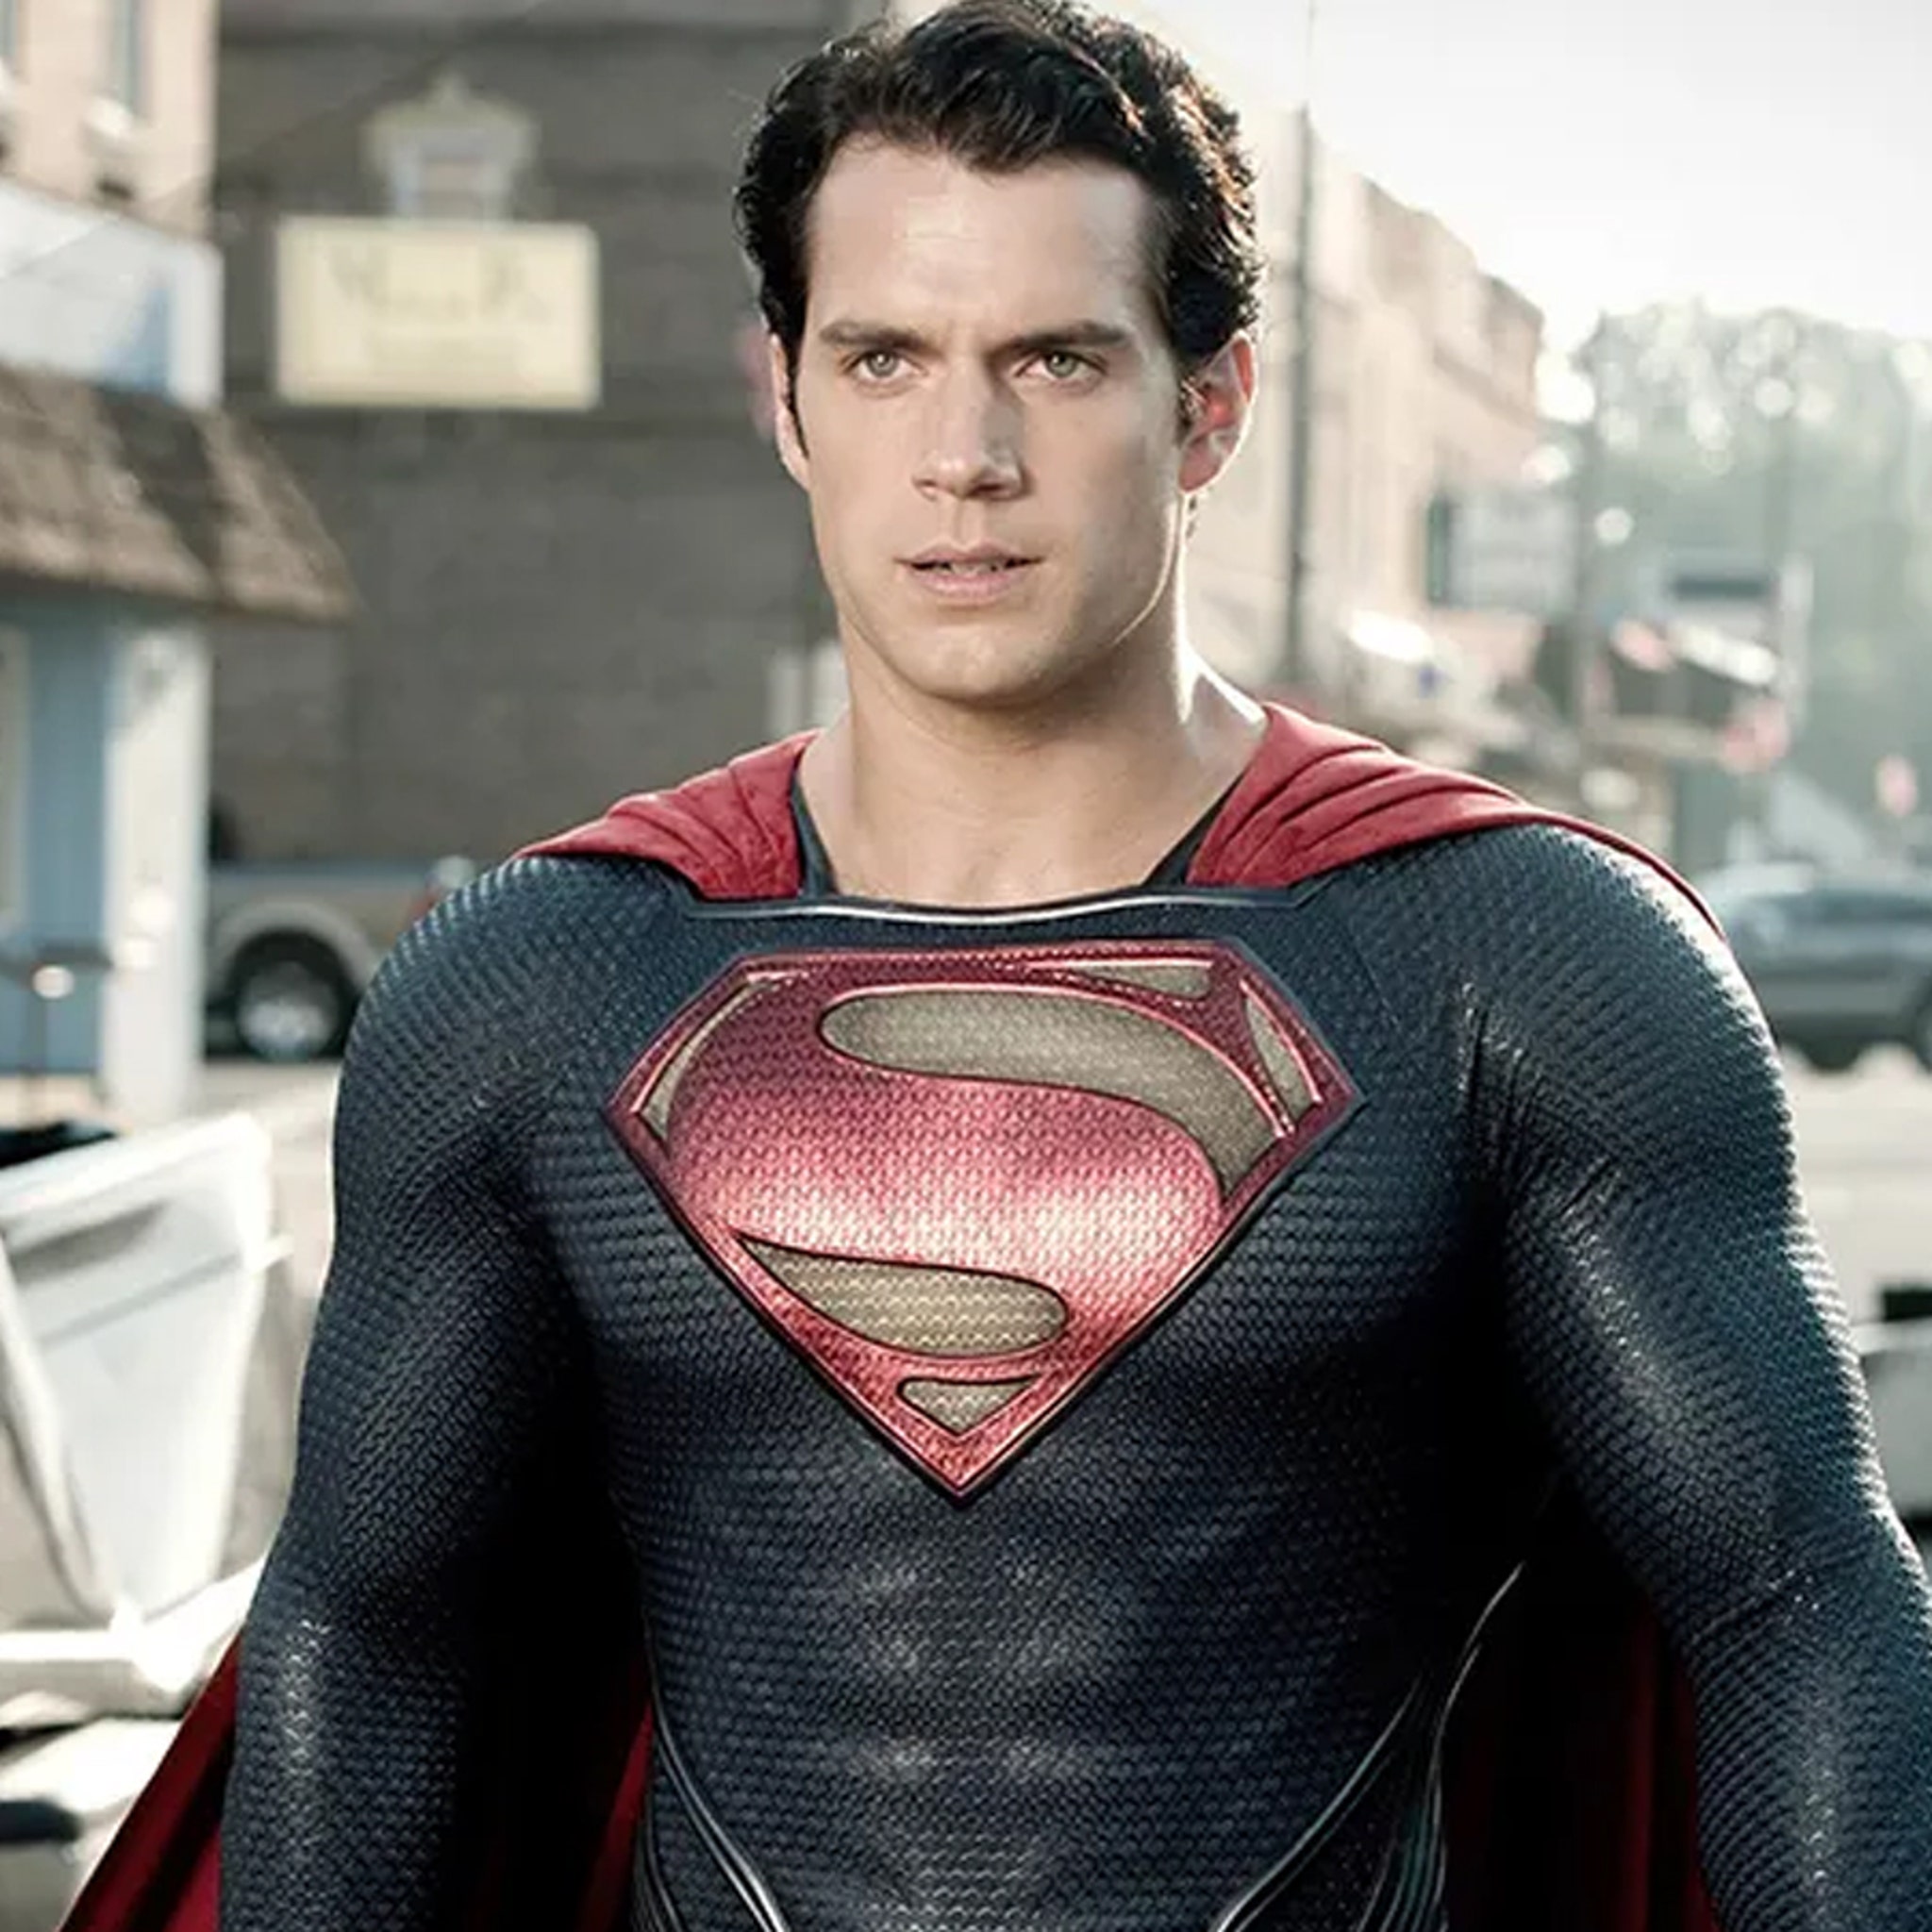 All-Time Best Henry Cavill Movies